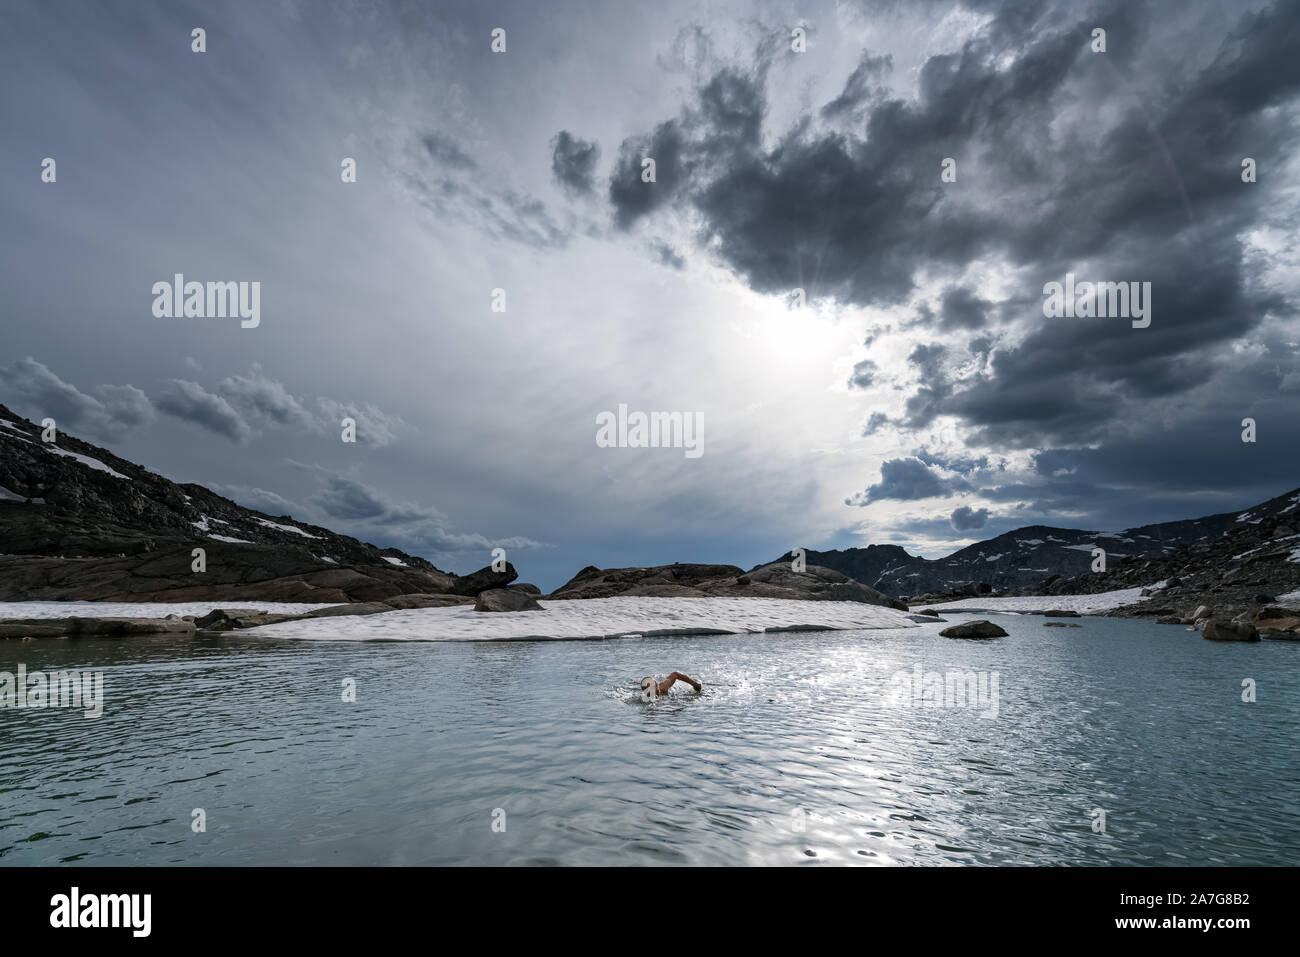 Hiking on the Wind River High Route and having an evening swim after a long day, Wyoming, USA Stock Photo